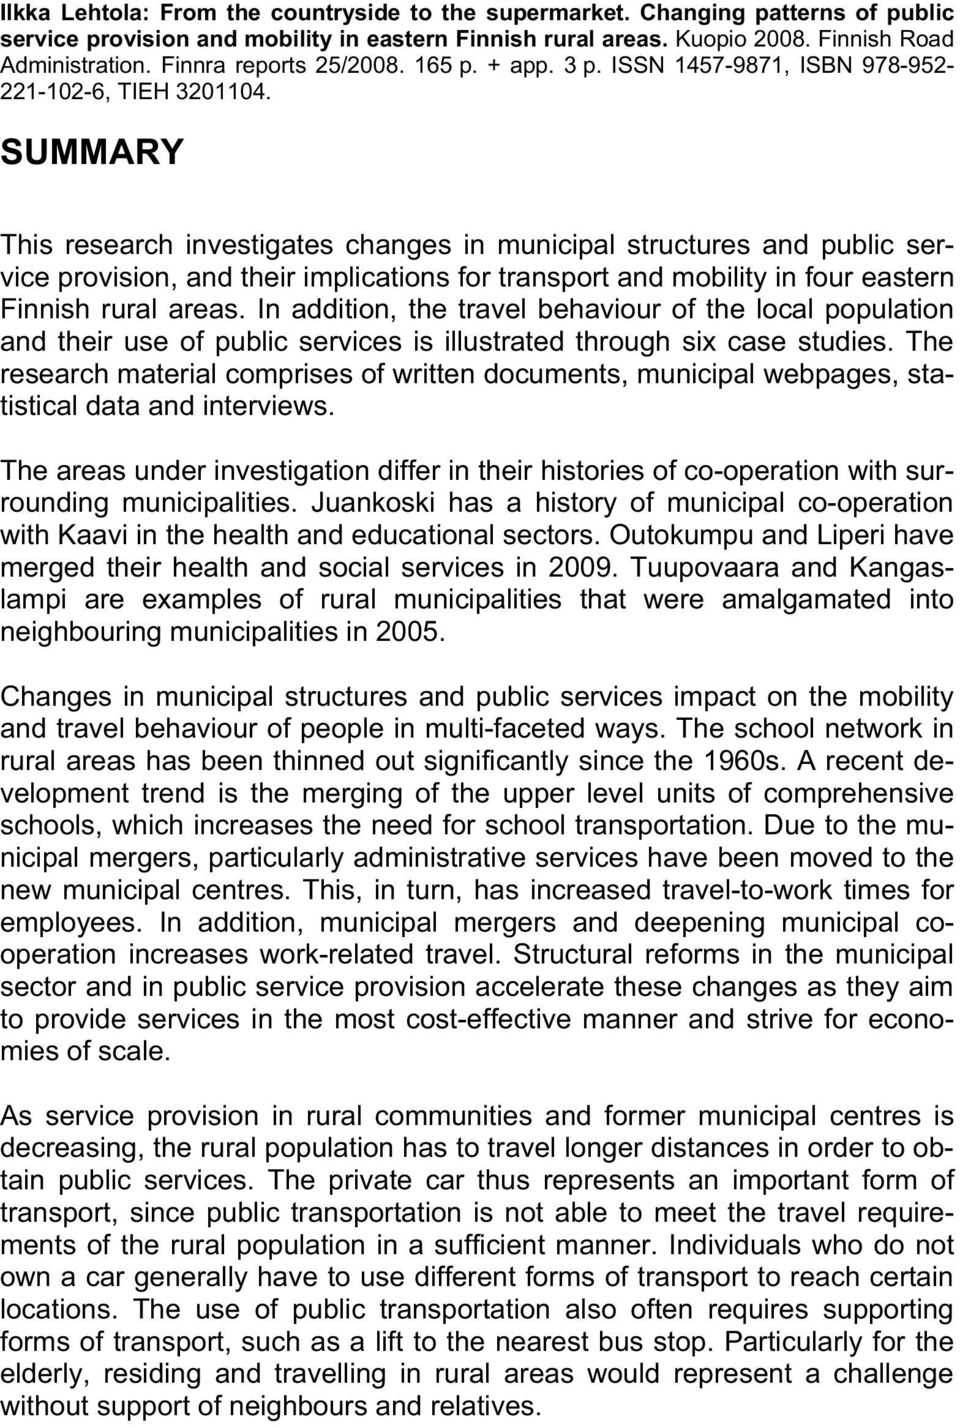 SUMMARY This research investigates changes in municipal structures and public service provision, and their implications for transport and mobility in four eastern Finnish rural areas.